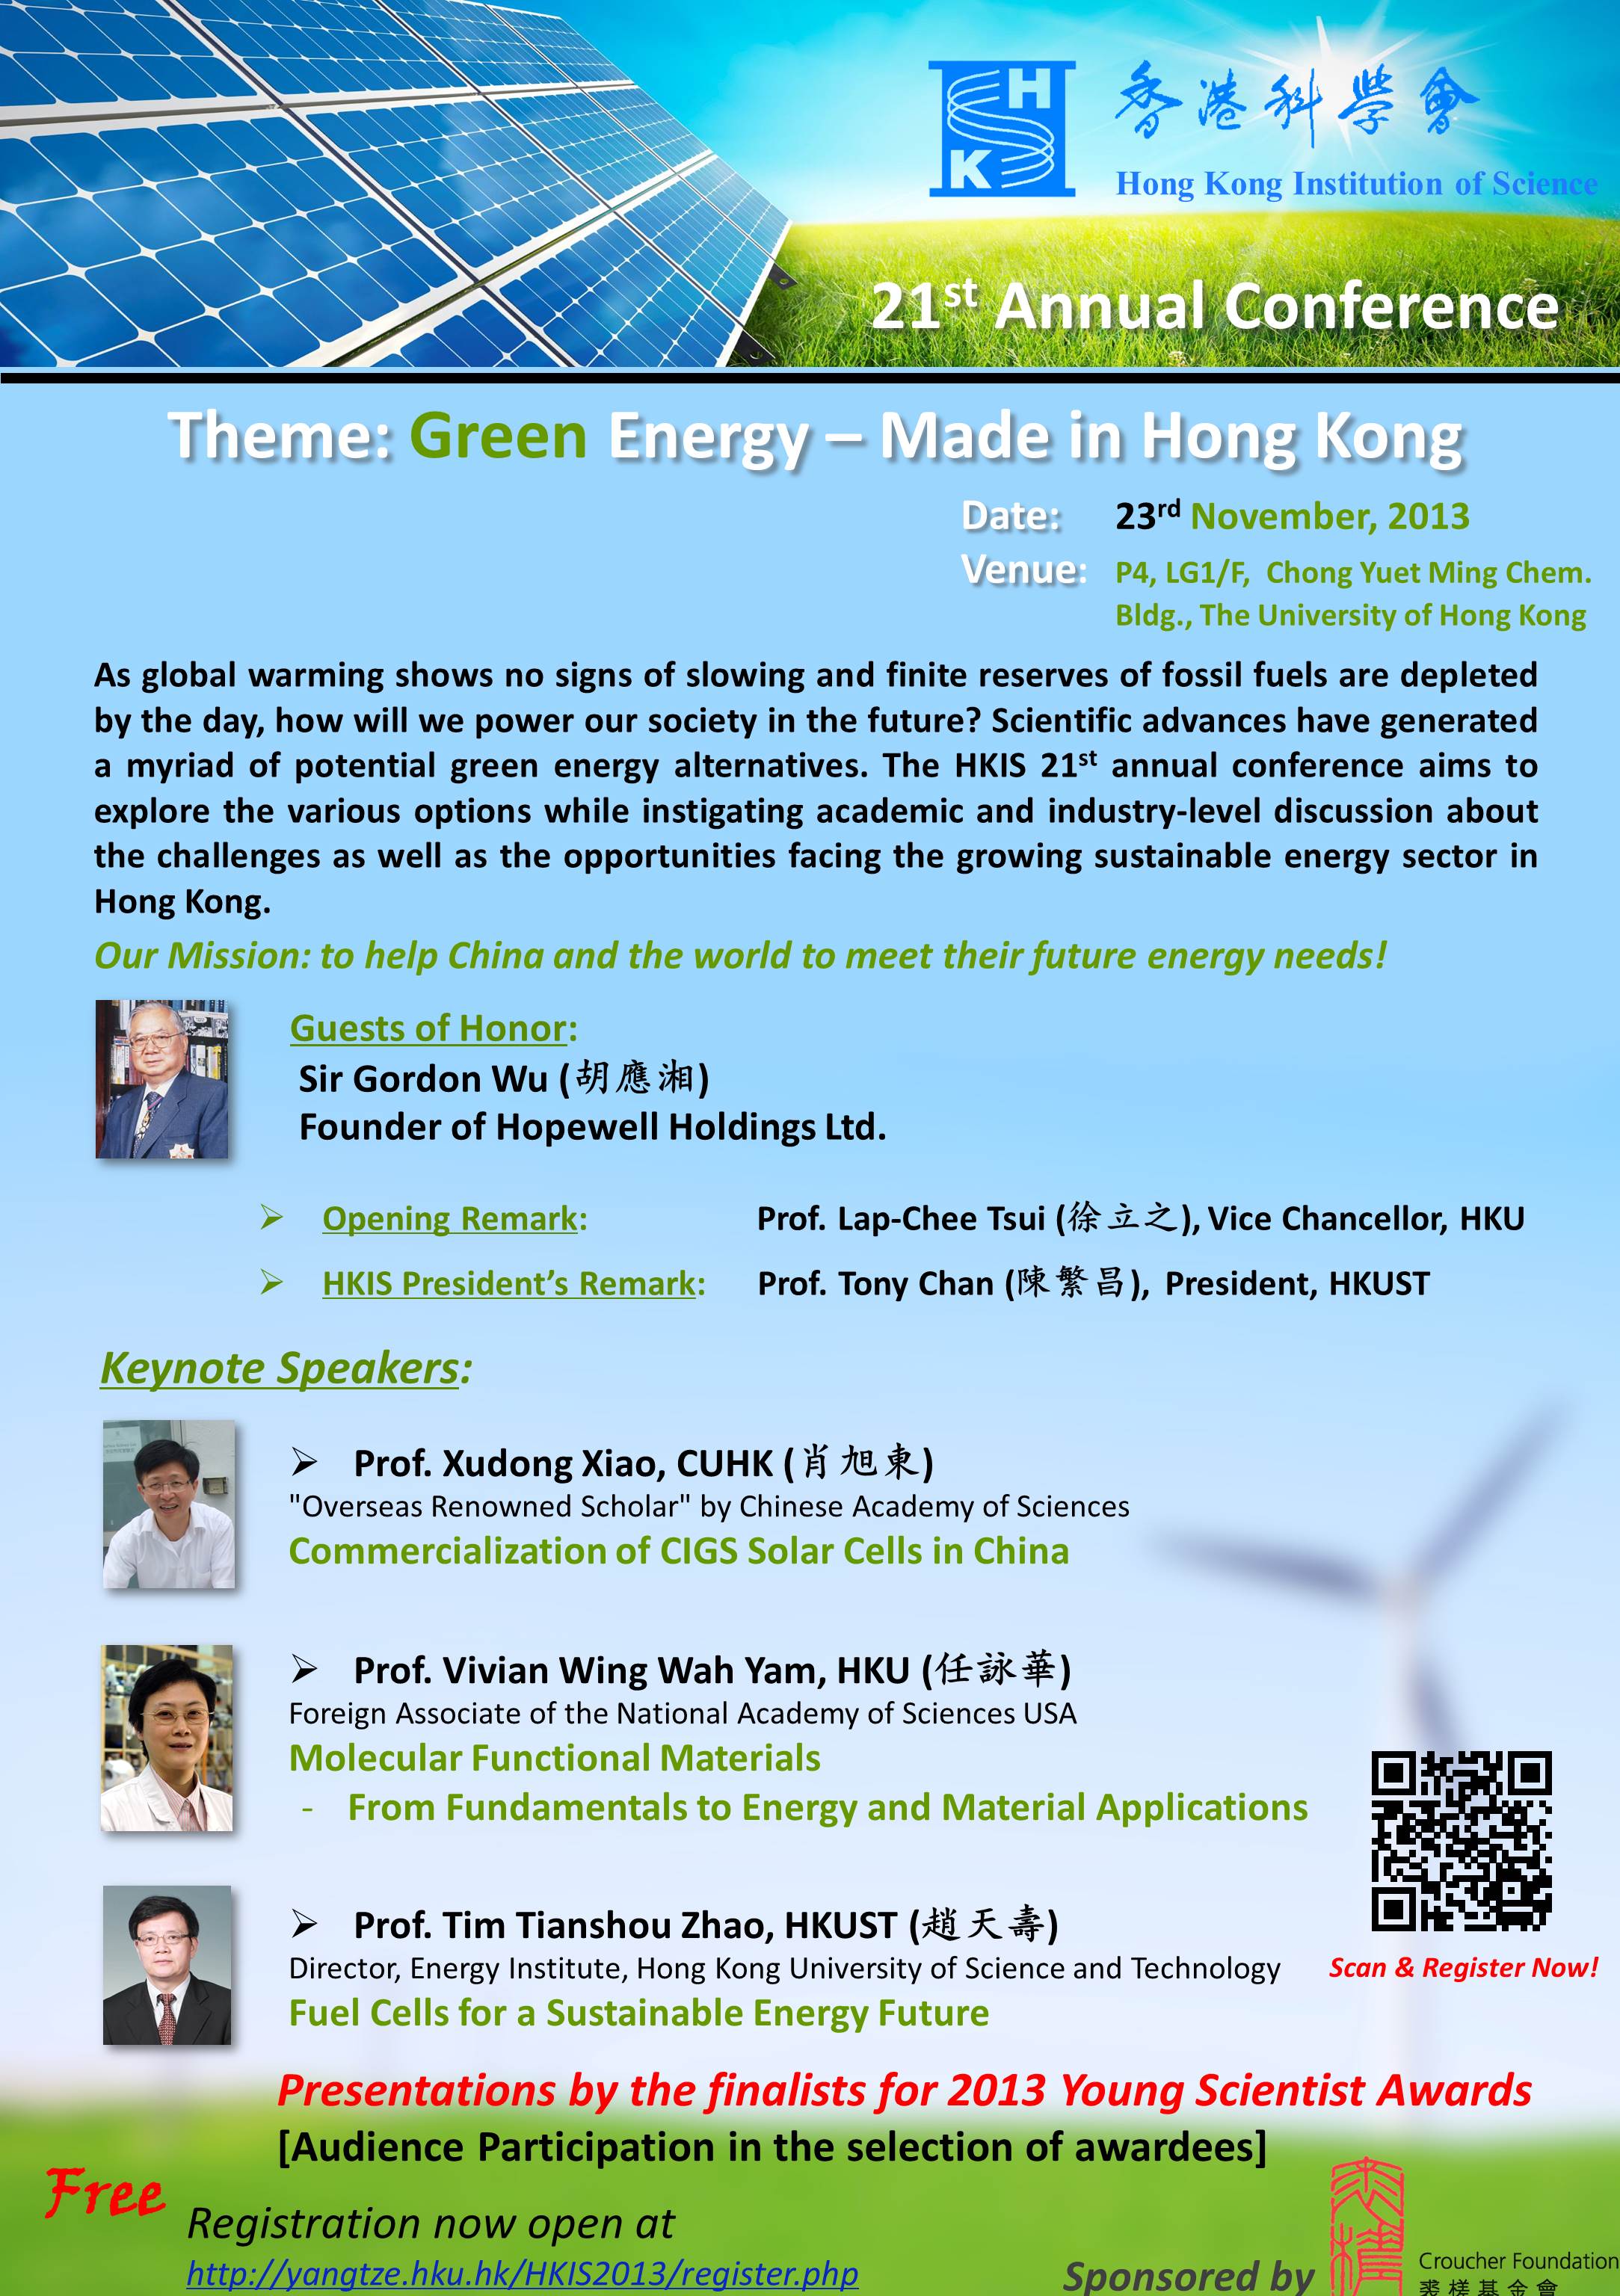 The 21st Annual Conference of Hong Kong Institution of Science: Green Energy – Made in Hong Kong